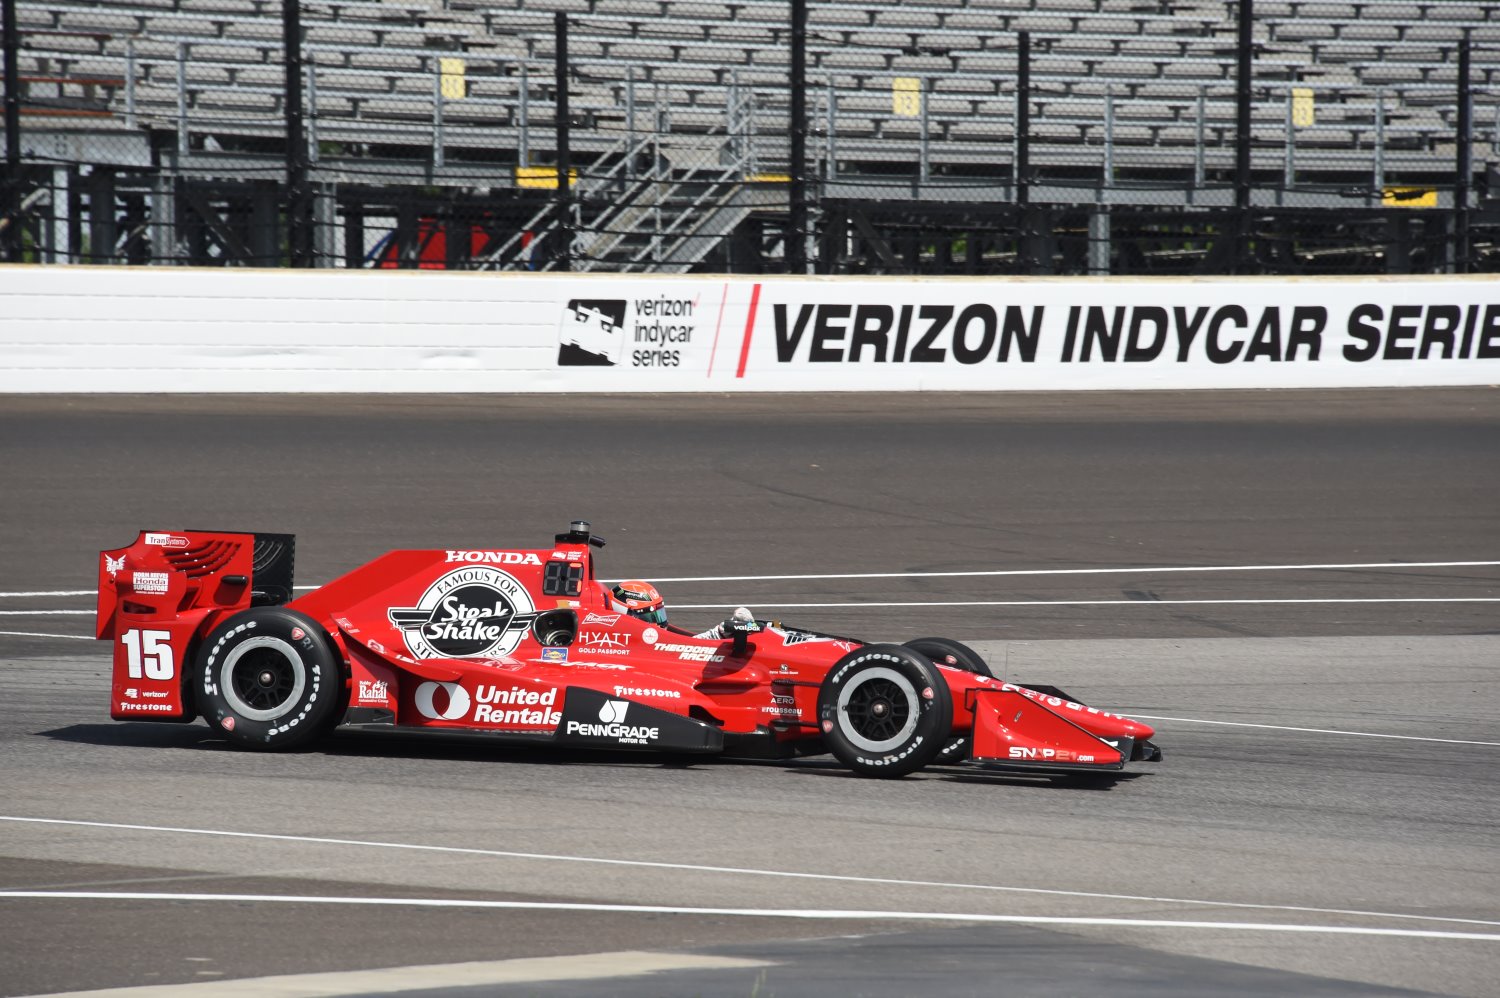 Rahal moved to last row of grid